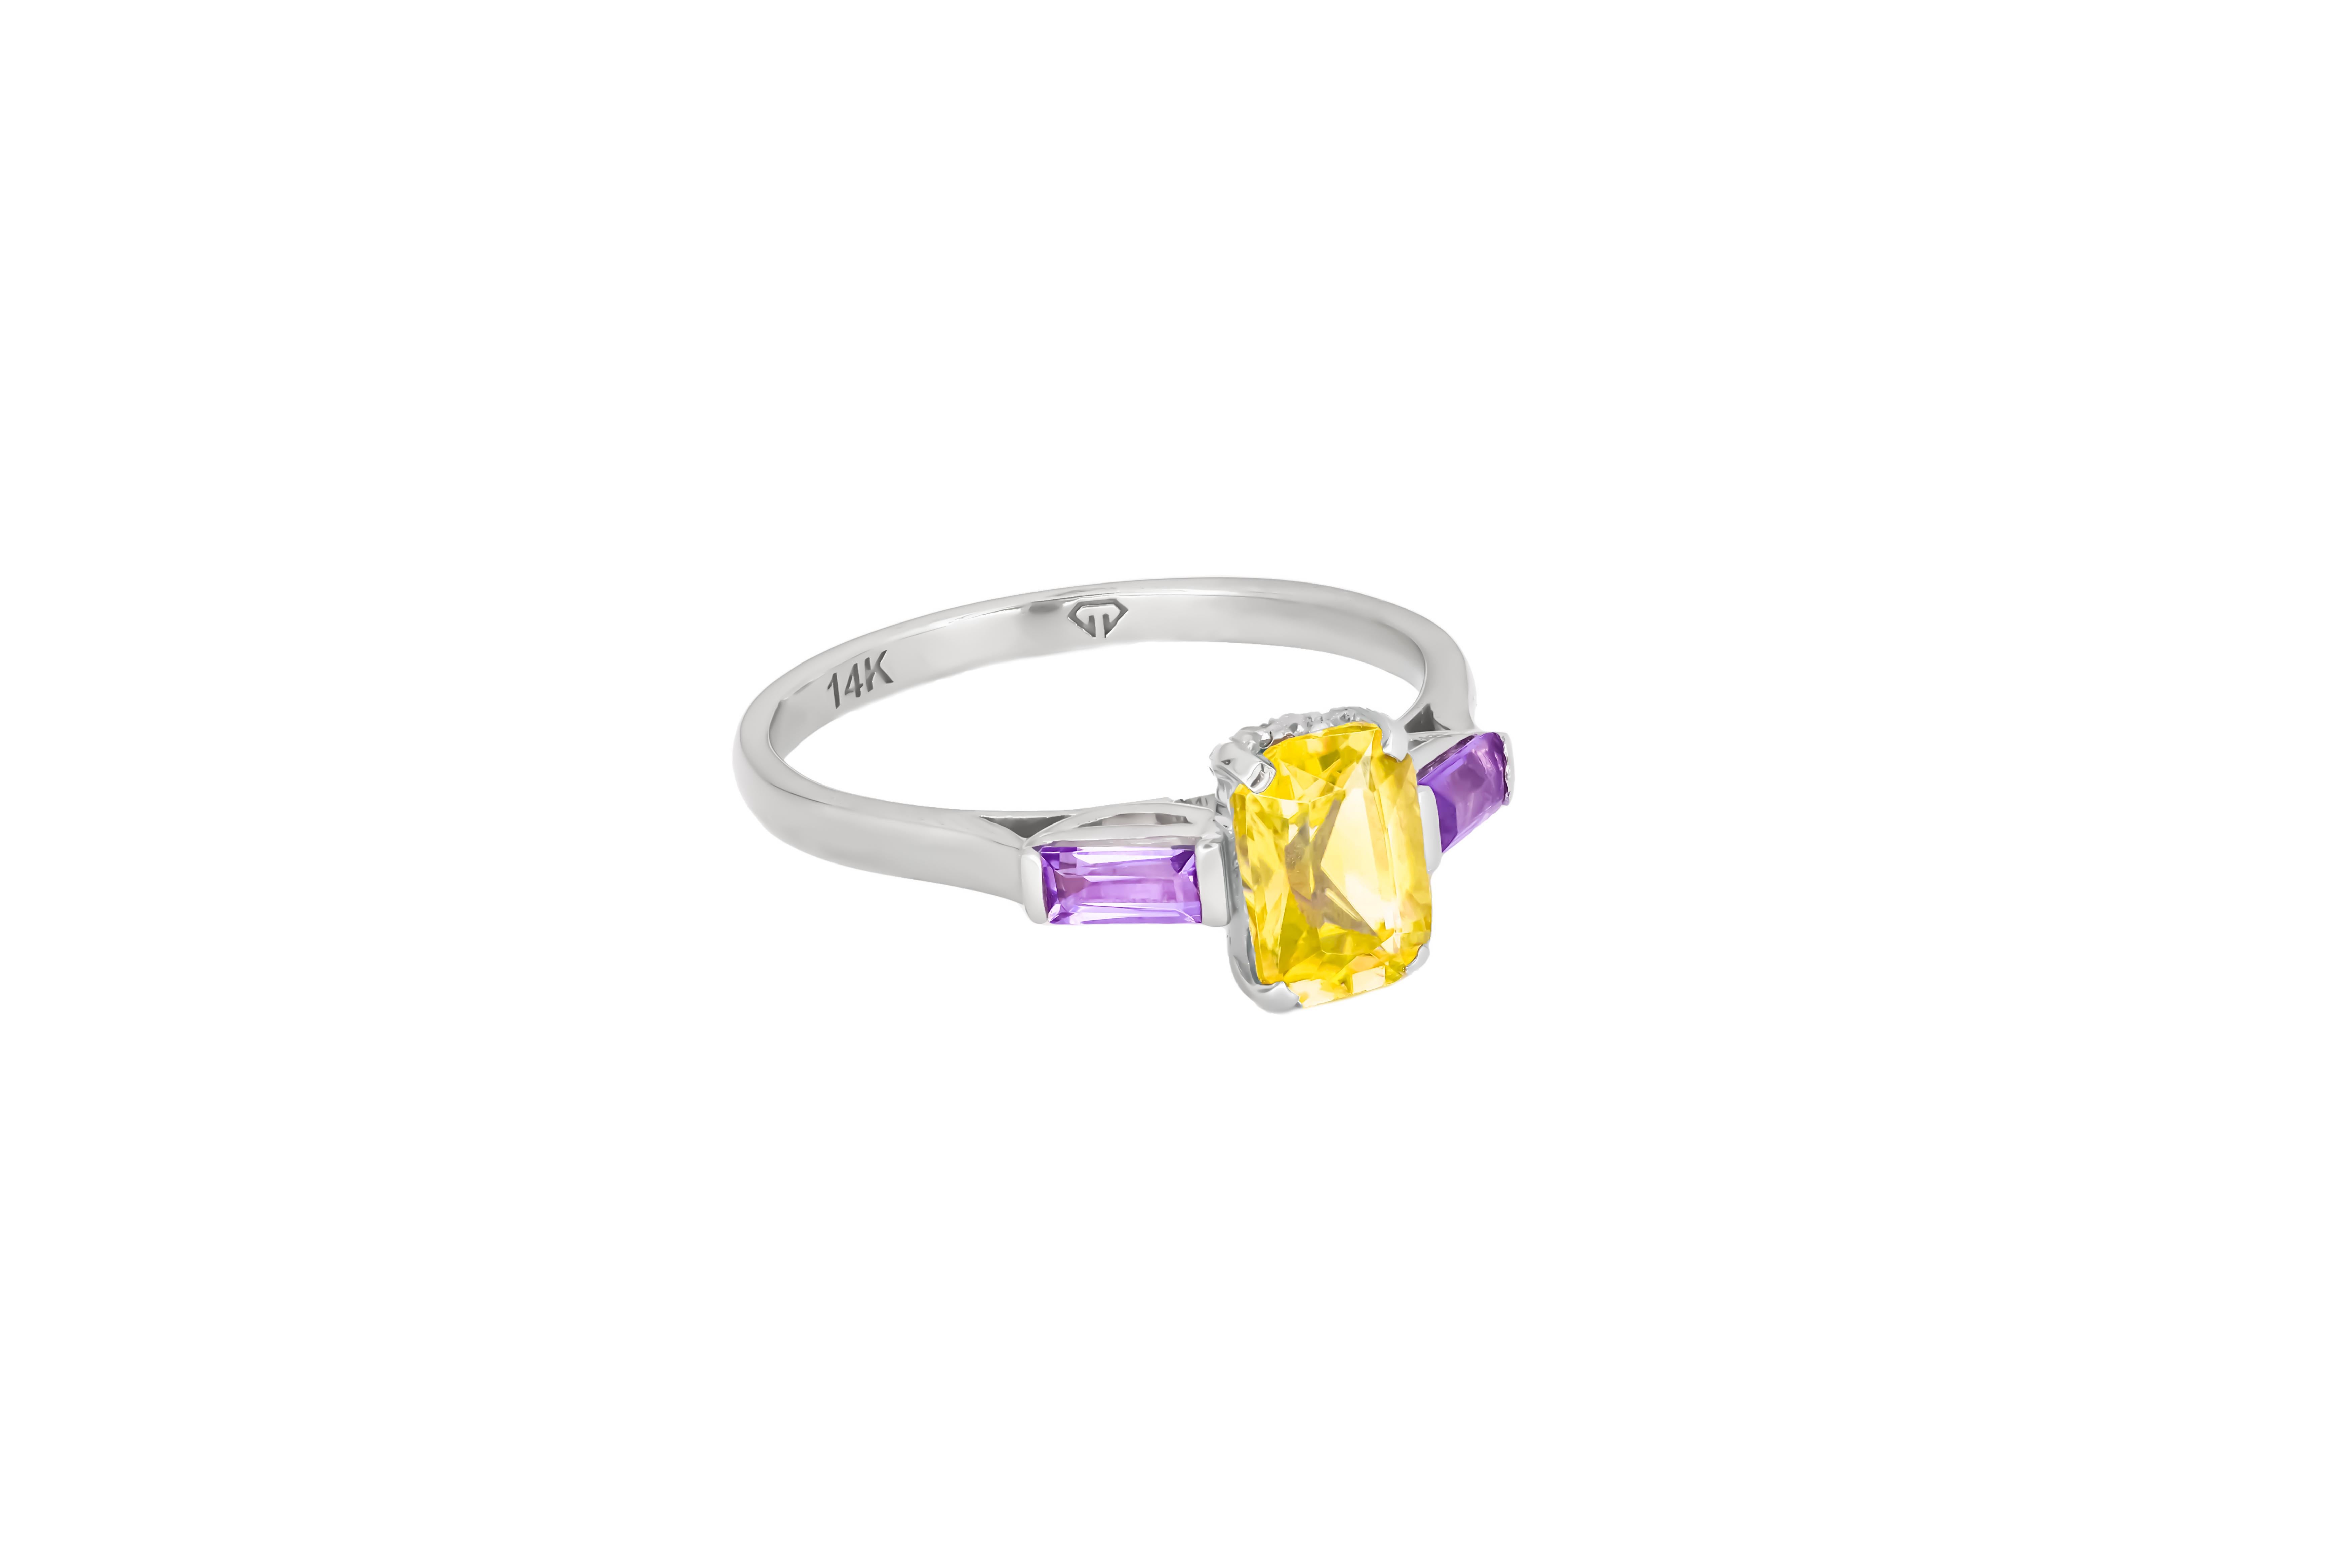 Octagon lab citrine 14k gold ring.  Trilogy Engagement Ring. Yellow lab citrine ring. Casual gold ring. 14k gold lab citrine and amethyst ring. Octagon lab citrine ring.  

Metal type: Gold
Metal stamp: 14k Gold
Weight: 2 gr depends from